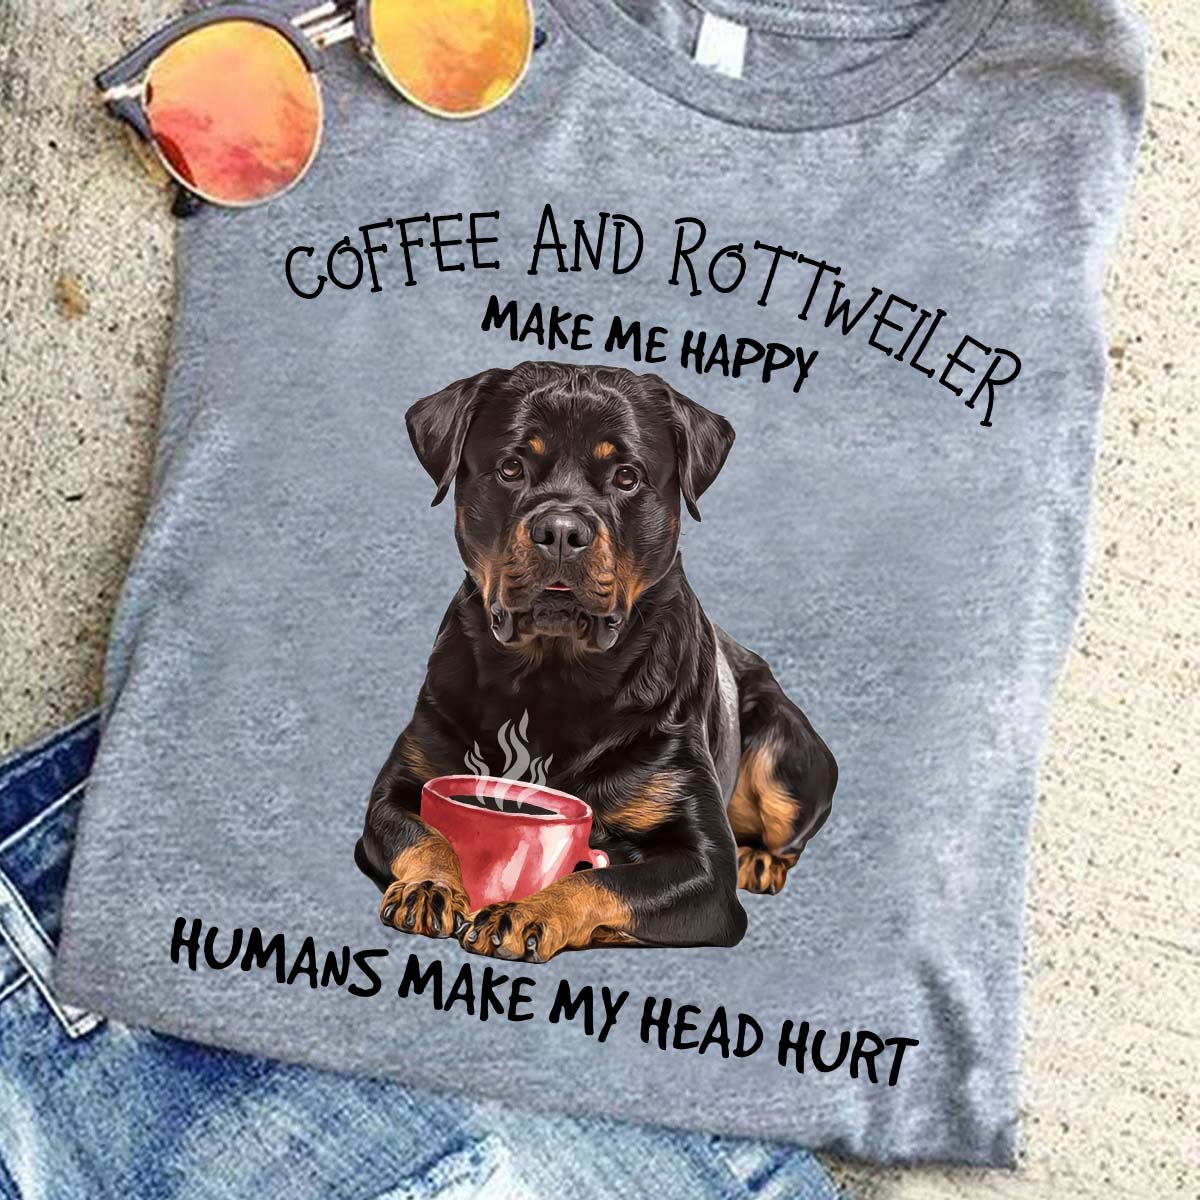 coffee and rottweiler, rottweiler dog, make me happy, humans hurt head